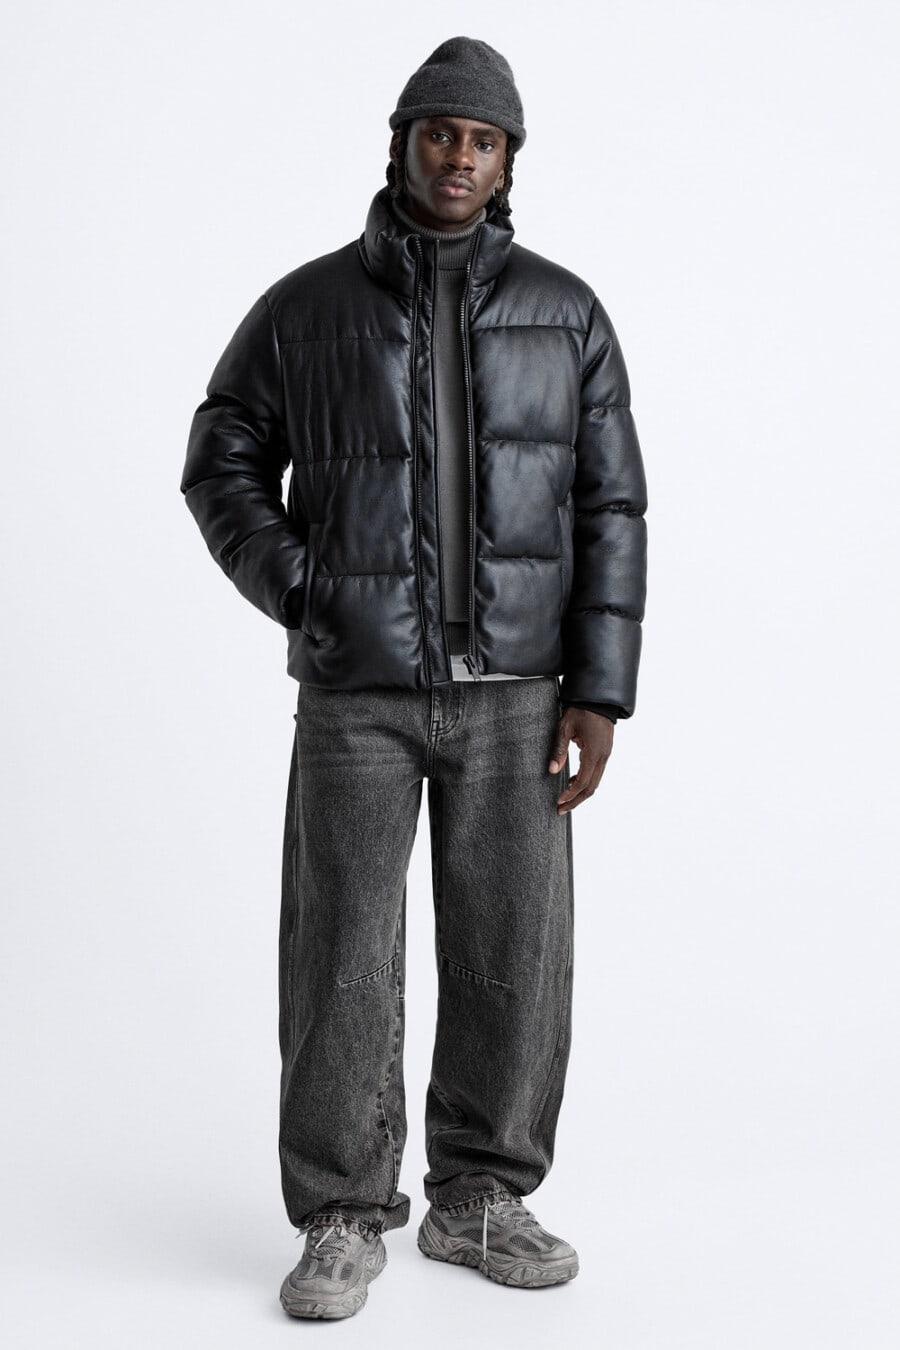 Men's baggy black jeans, charcoal turtleneck, black puffer jacket, charcoal beanie and grey chunky sneakers outfit